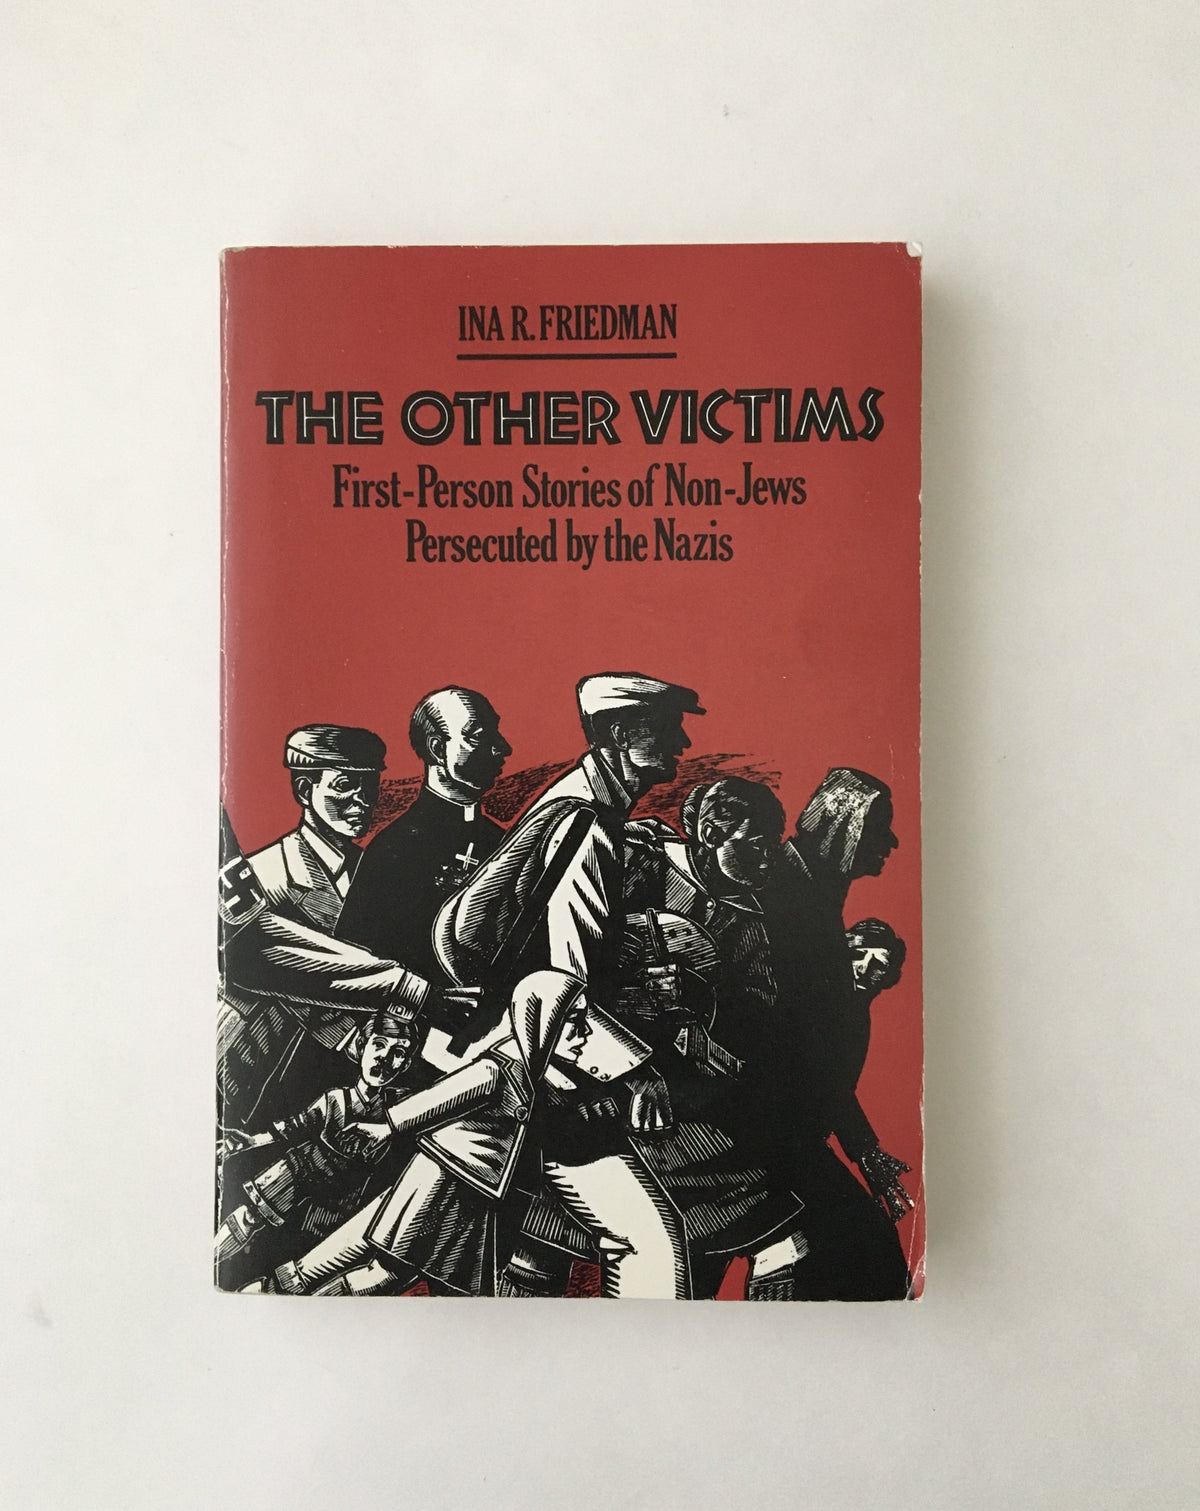 The Other Victims: First-Person Stories of Non-Jews Persecuted by the Nazis by Ina Friedman